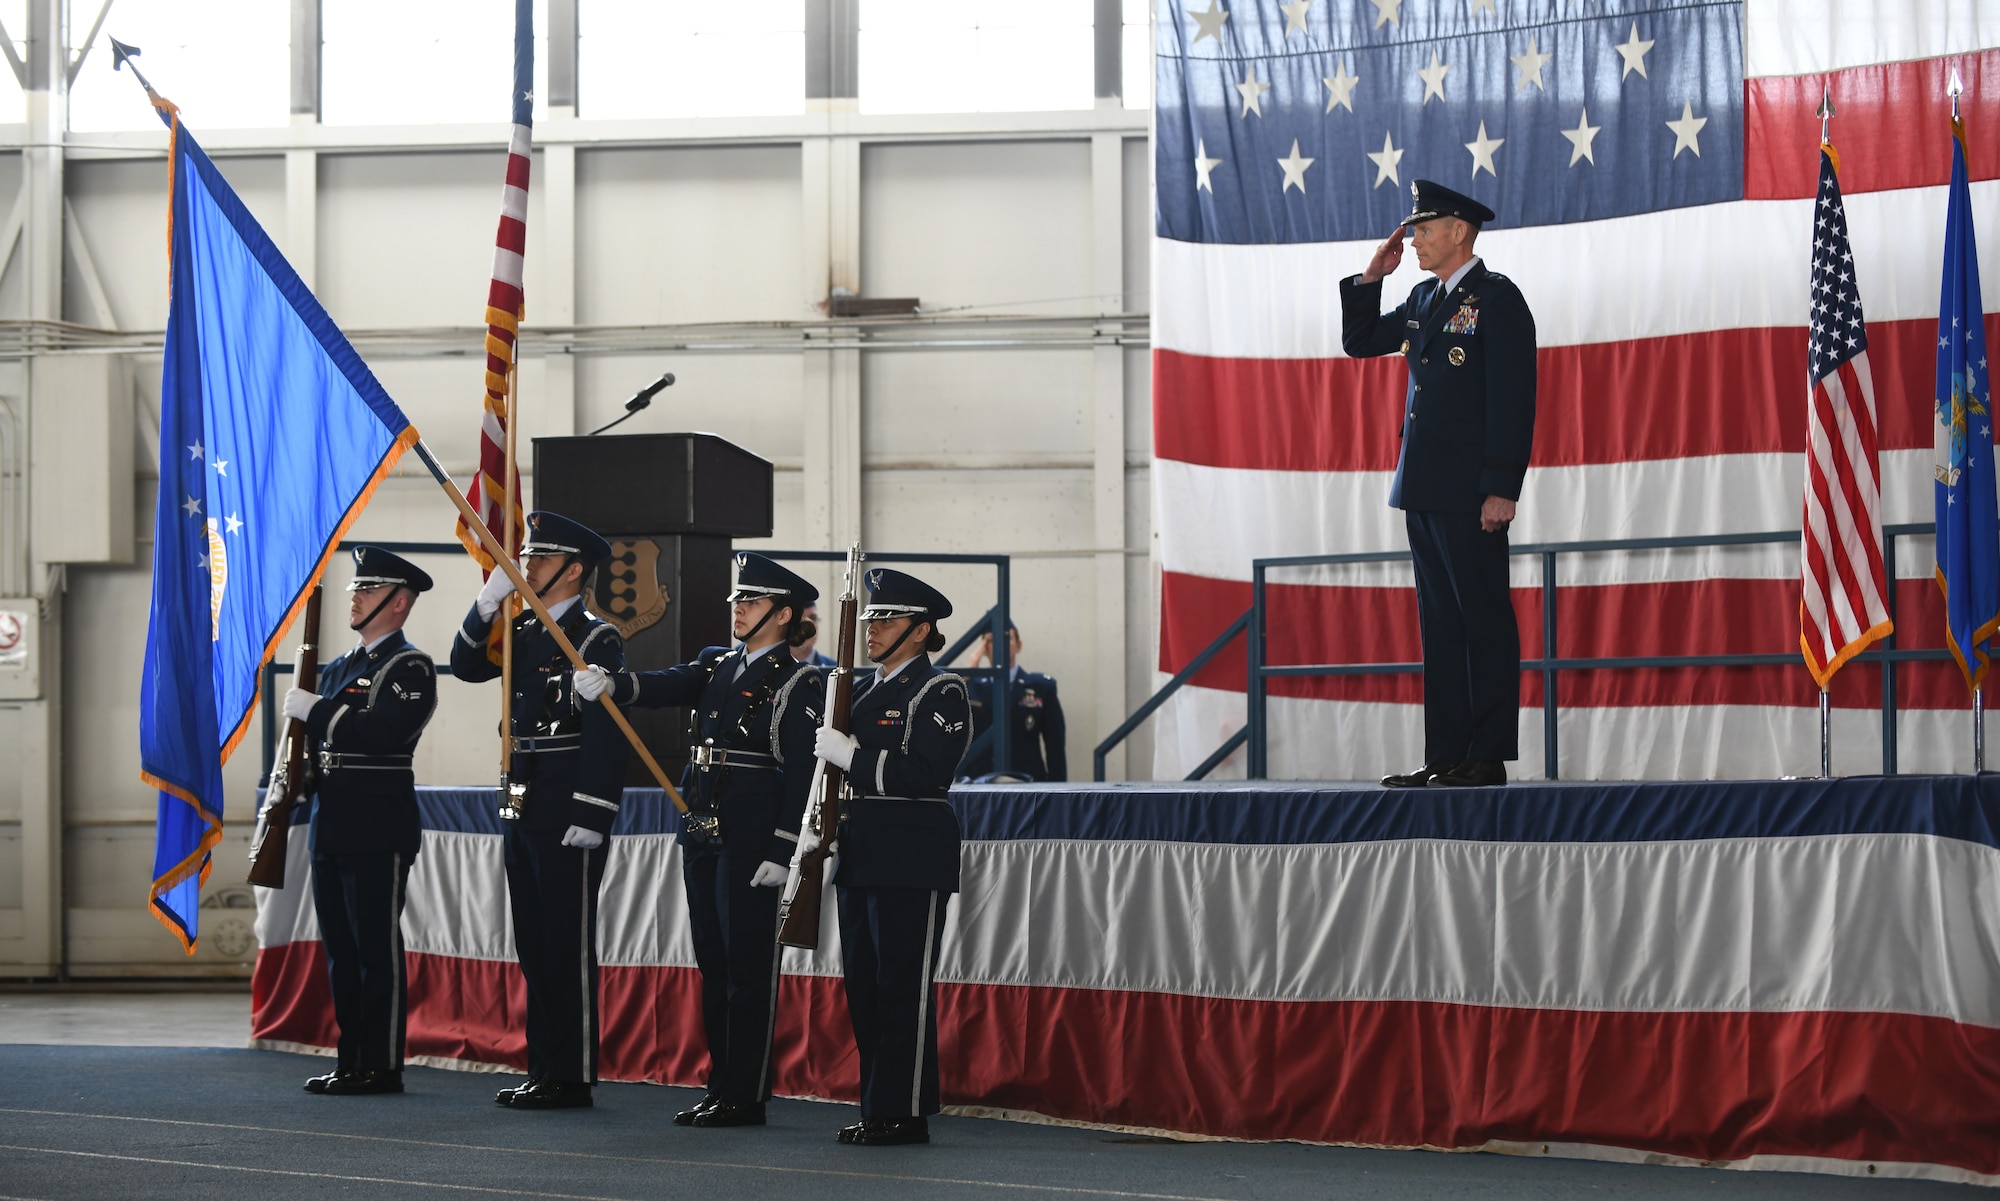 Maj. Gen. James Dawkins Jr., the 8th Air Force commander, salutes as the Honor Guard presents the colors, during a change of command ceremony at Ellsworth Air Force Base, S.D., May 30, 2019. The ceremony is a time-honored military tradition that serves as representation of the exchange of responsibility and authority from one commander to another. (U.S. Air Force photo by Airman 1st Class Christina Bennett)